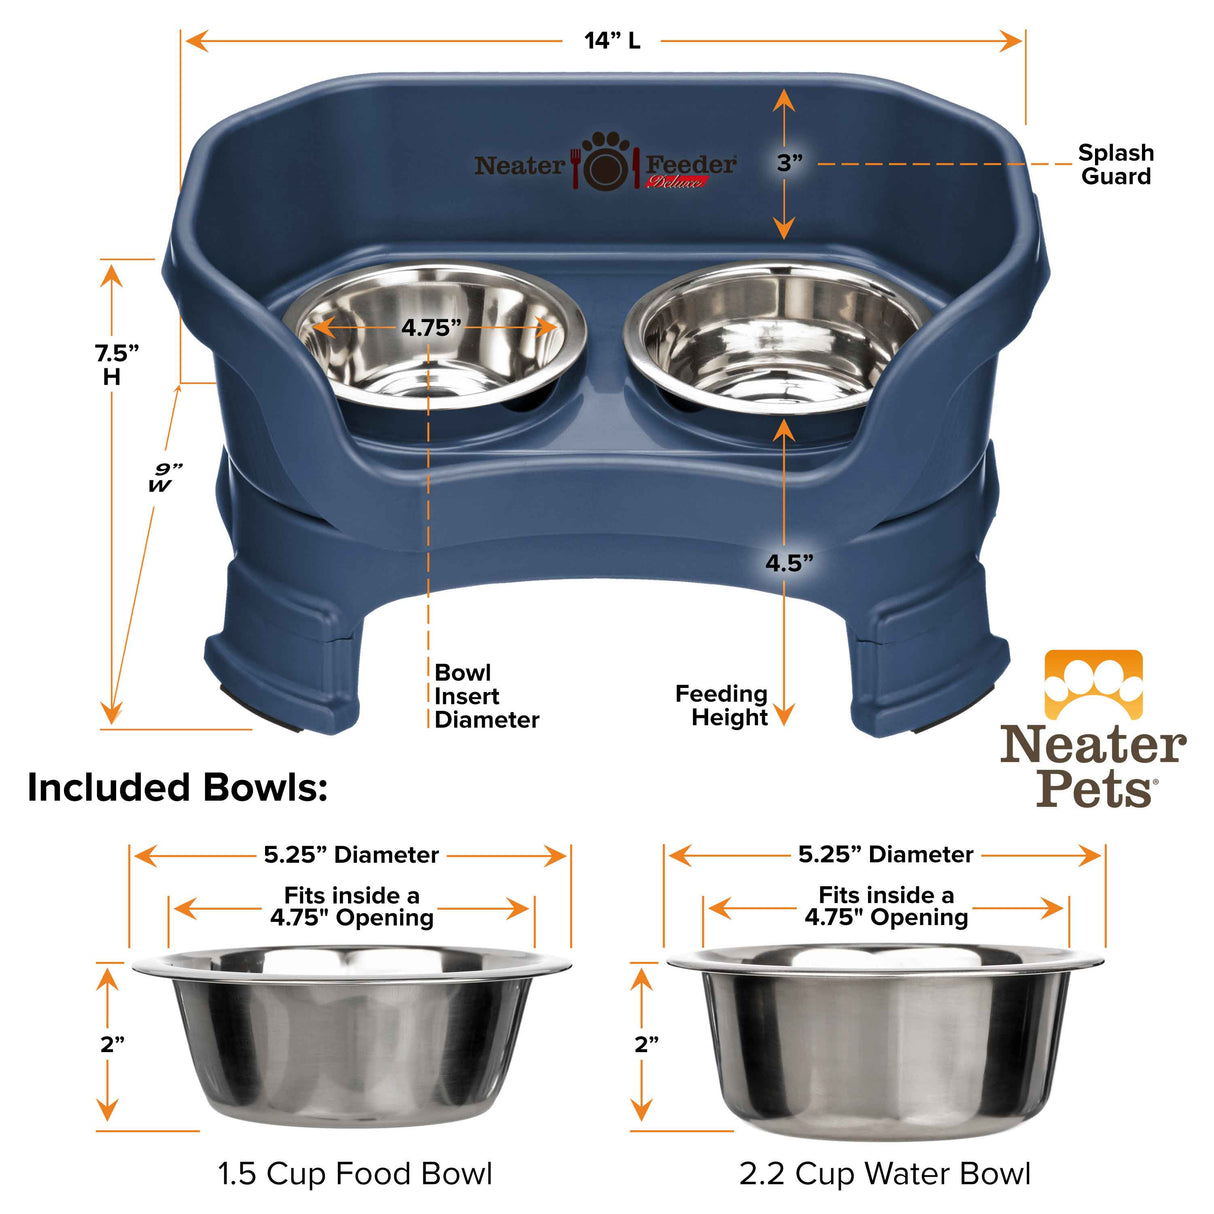 Deluxe small with leg extensions feeder and bowl dimensions